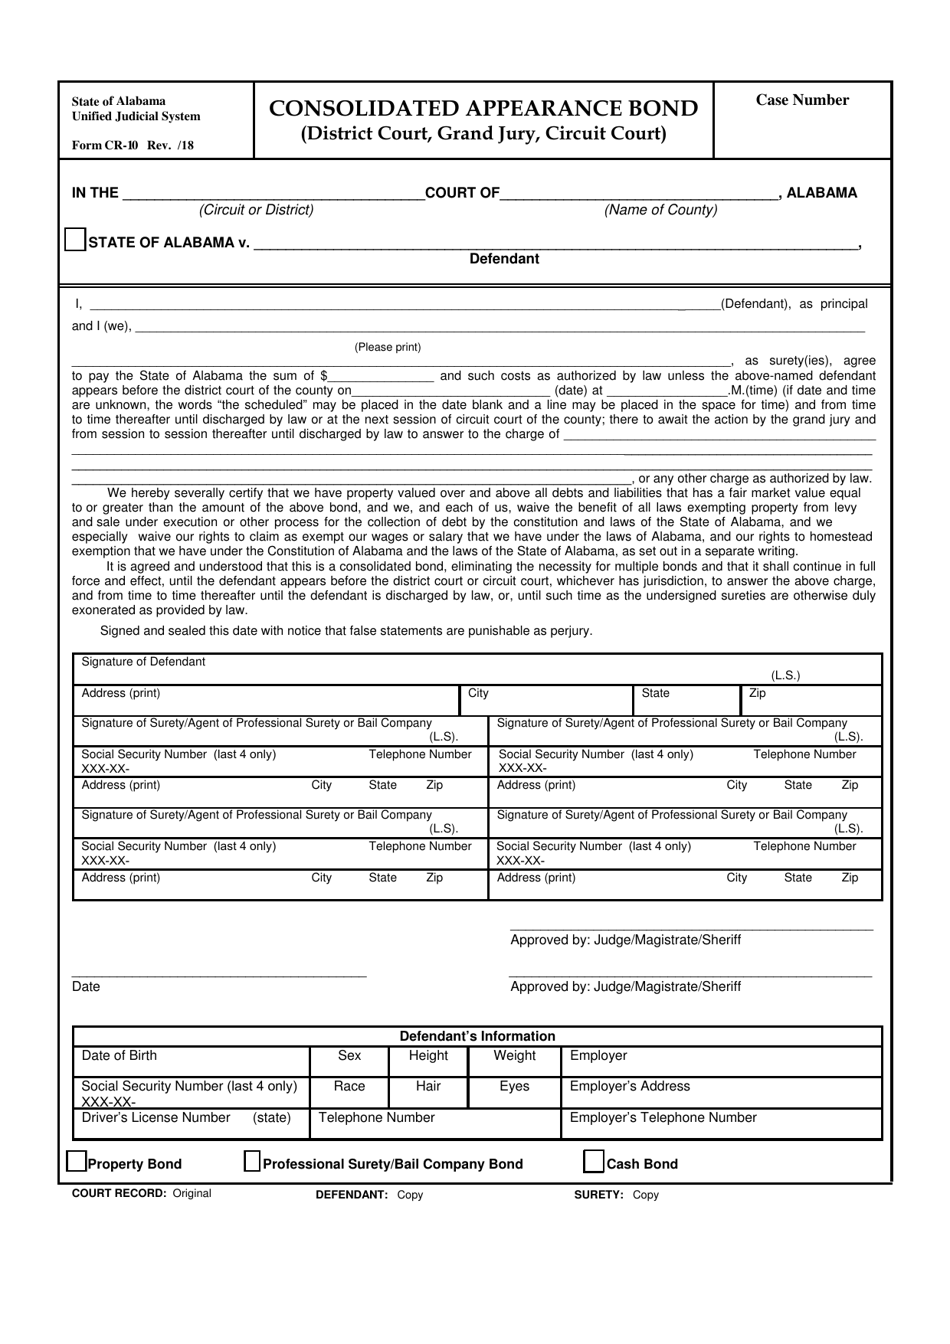 Form CR-10 Consolidated Appearance Bond (District Court, Grand Jury, Circuit Court) - Alabama, Page 1